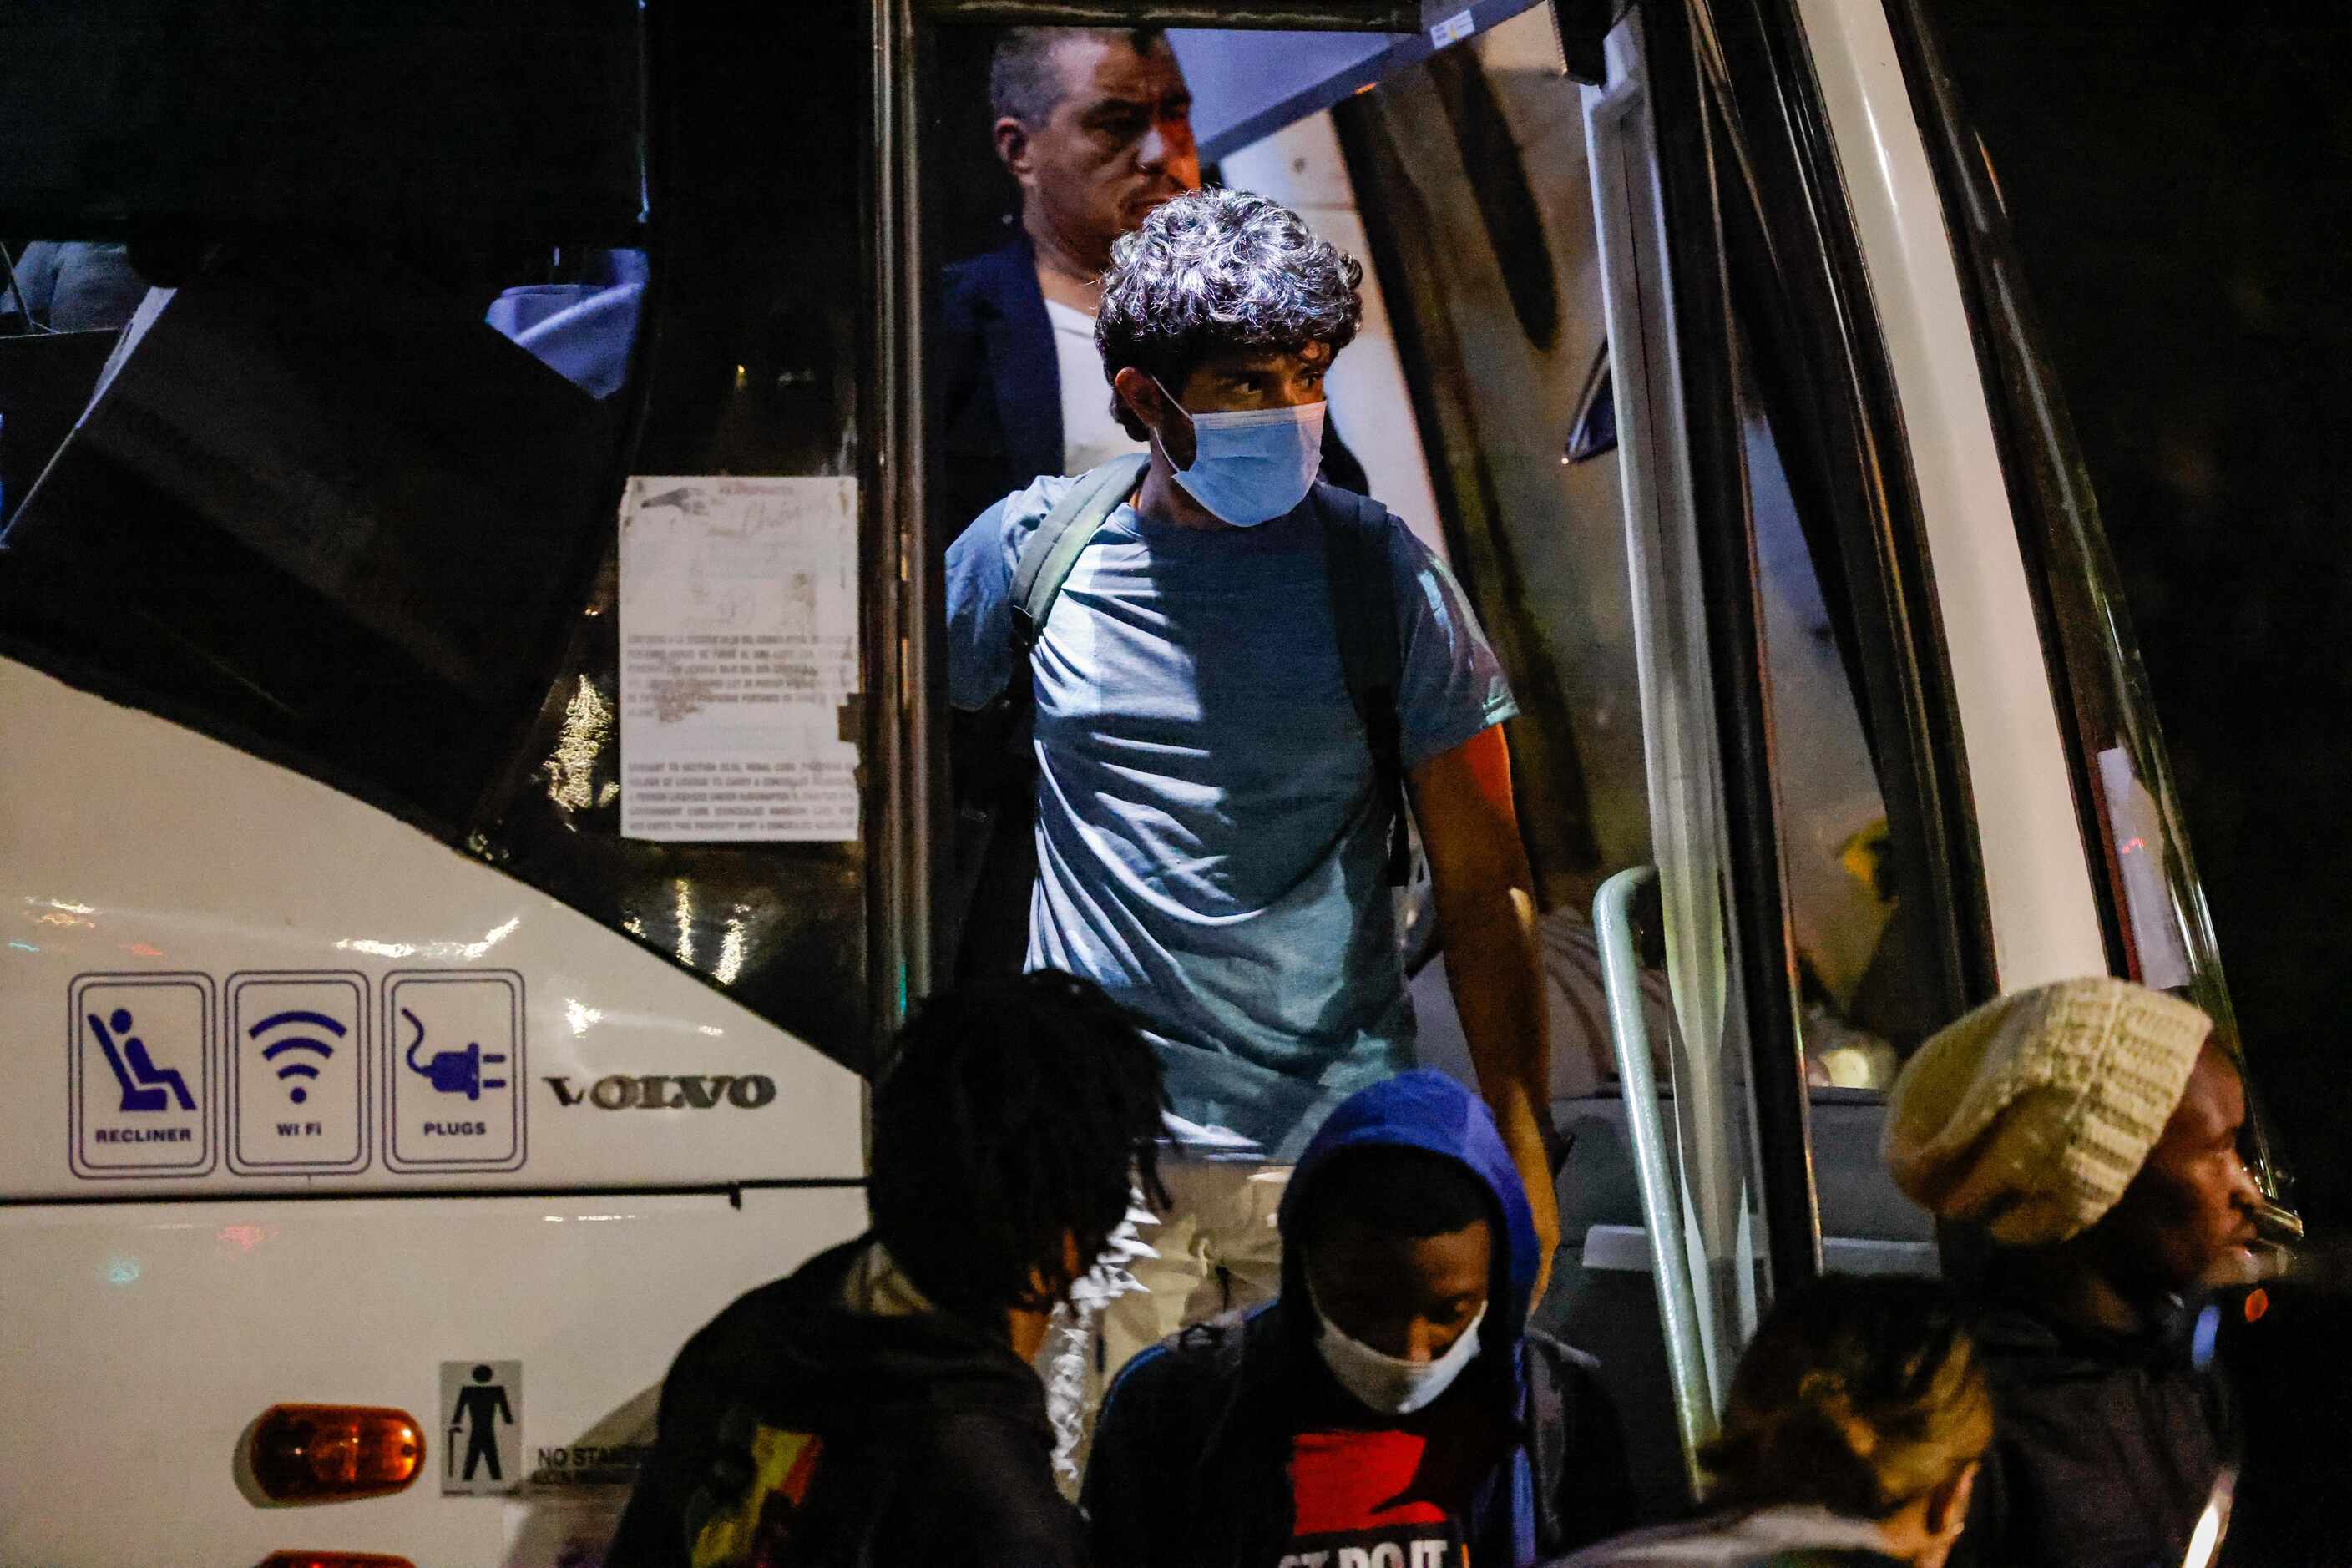 Victor Rodriguez, 26, disembarks the bus that took him along with a group of migrants from...